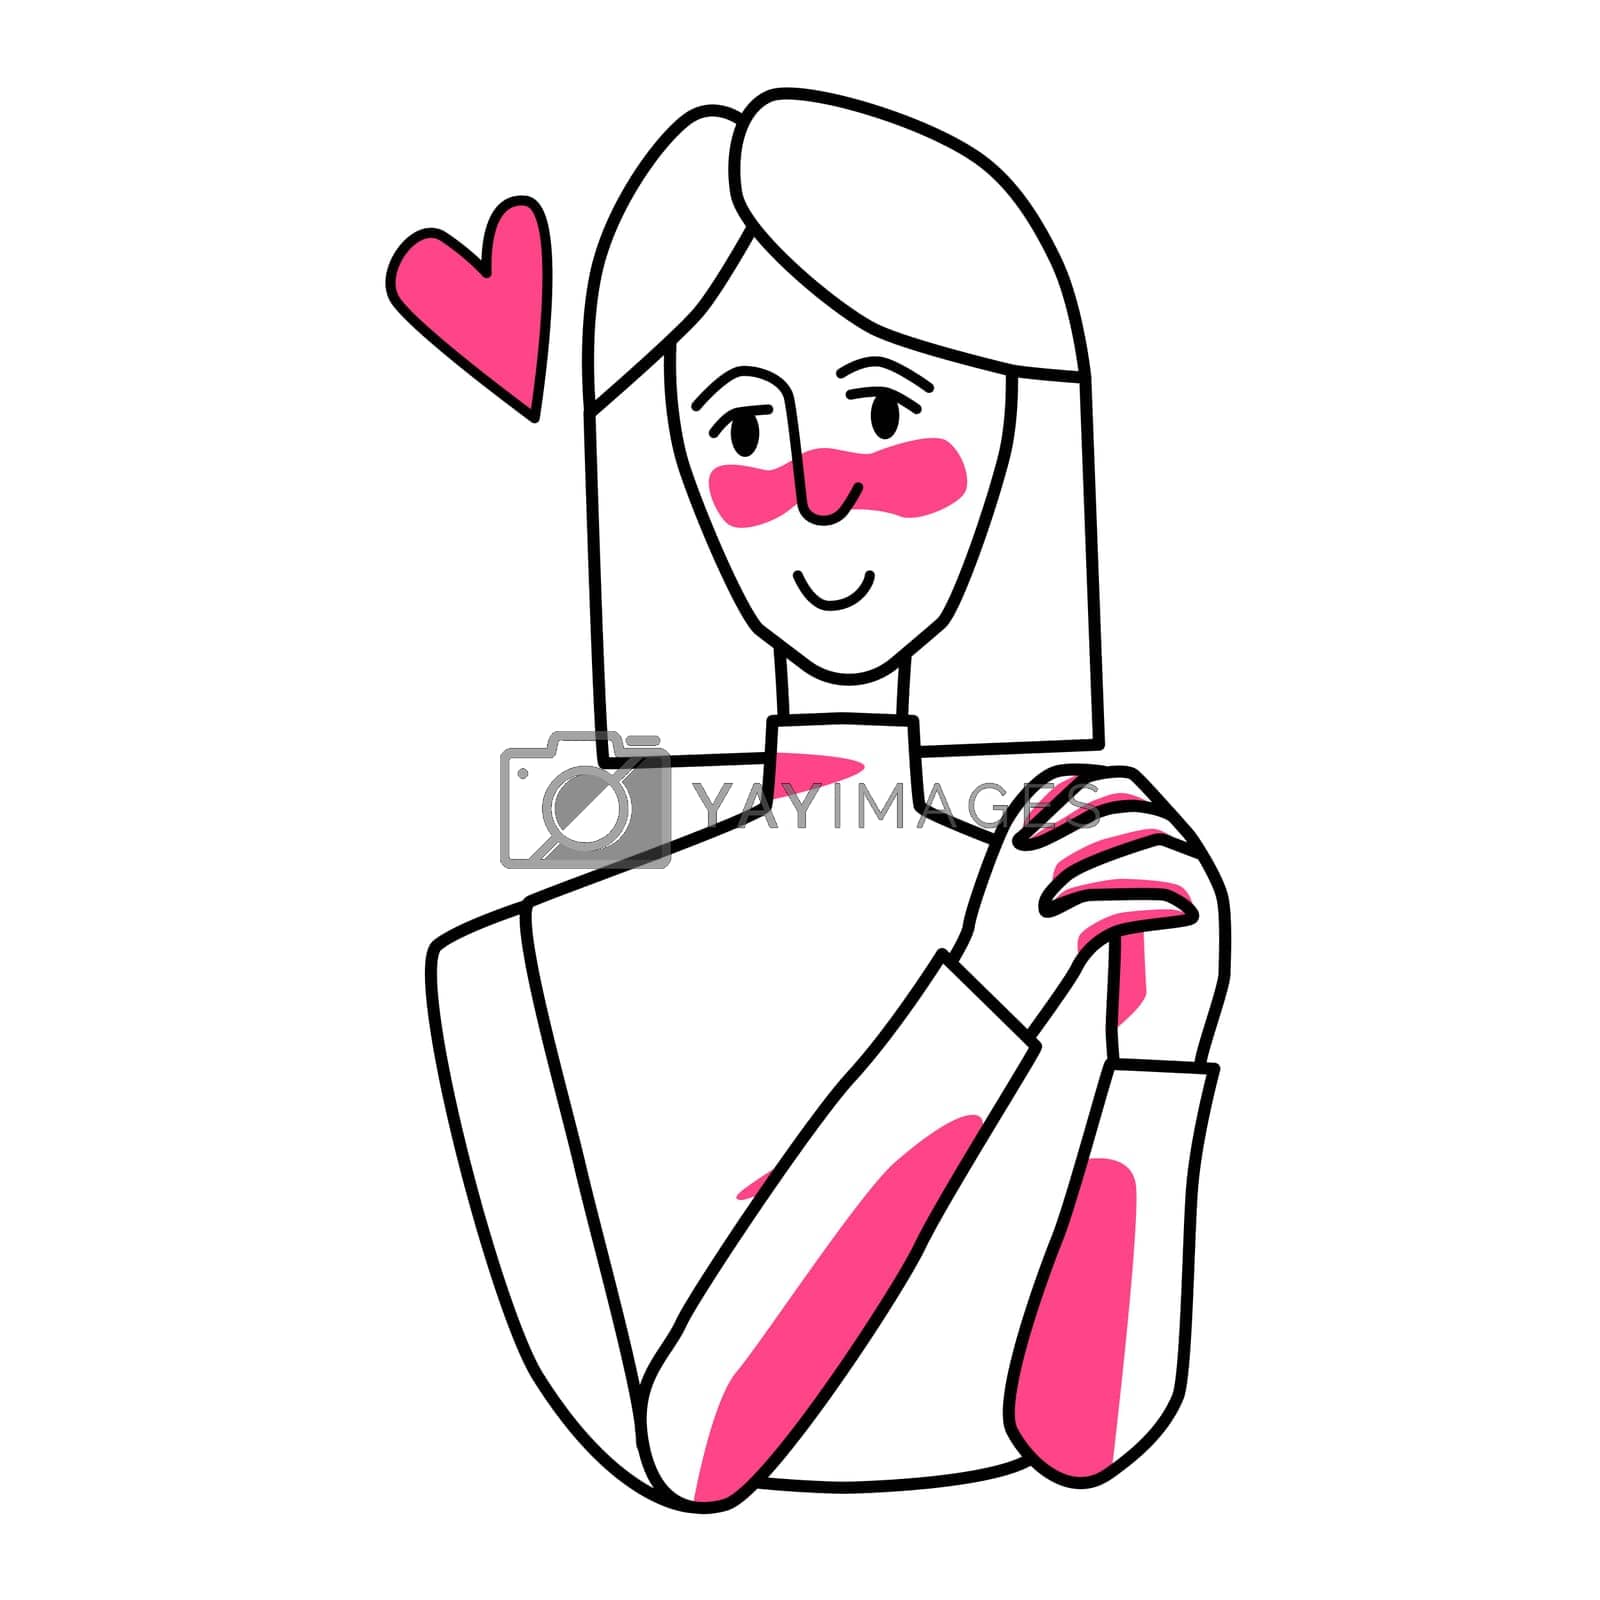 Royalty free image of Shy woman with emotion of love. Beloved female half body drawing, sweetheart tender mood of a maid, amour affection flirting. Line with pink spots style. by Litteralis